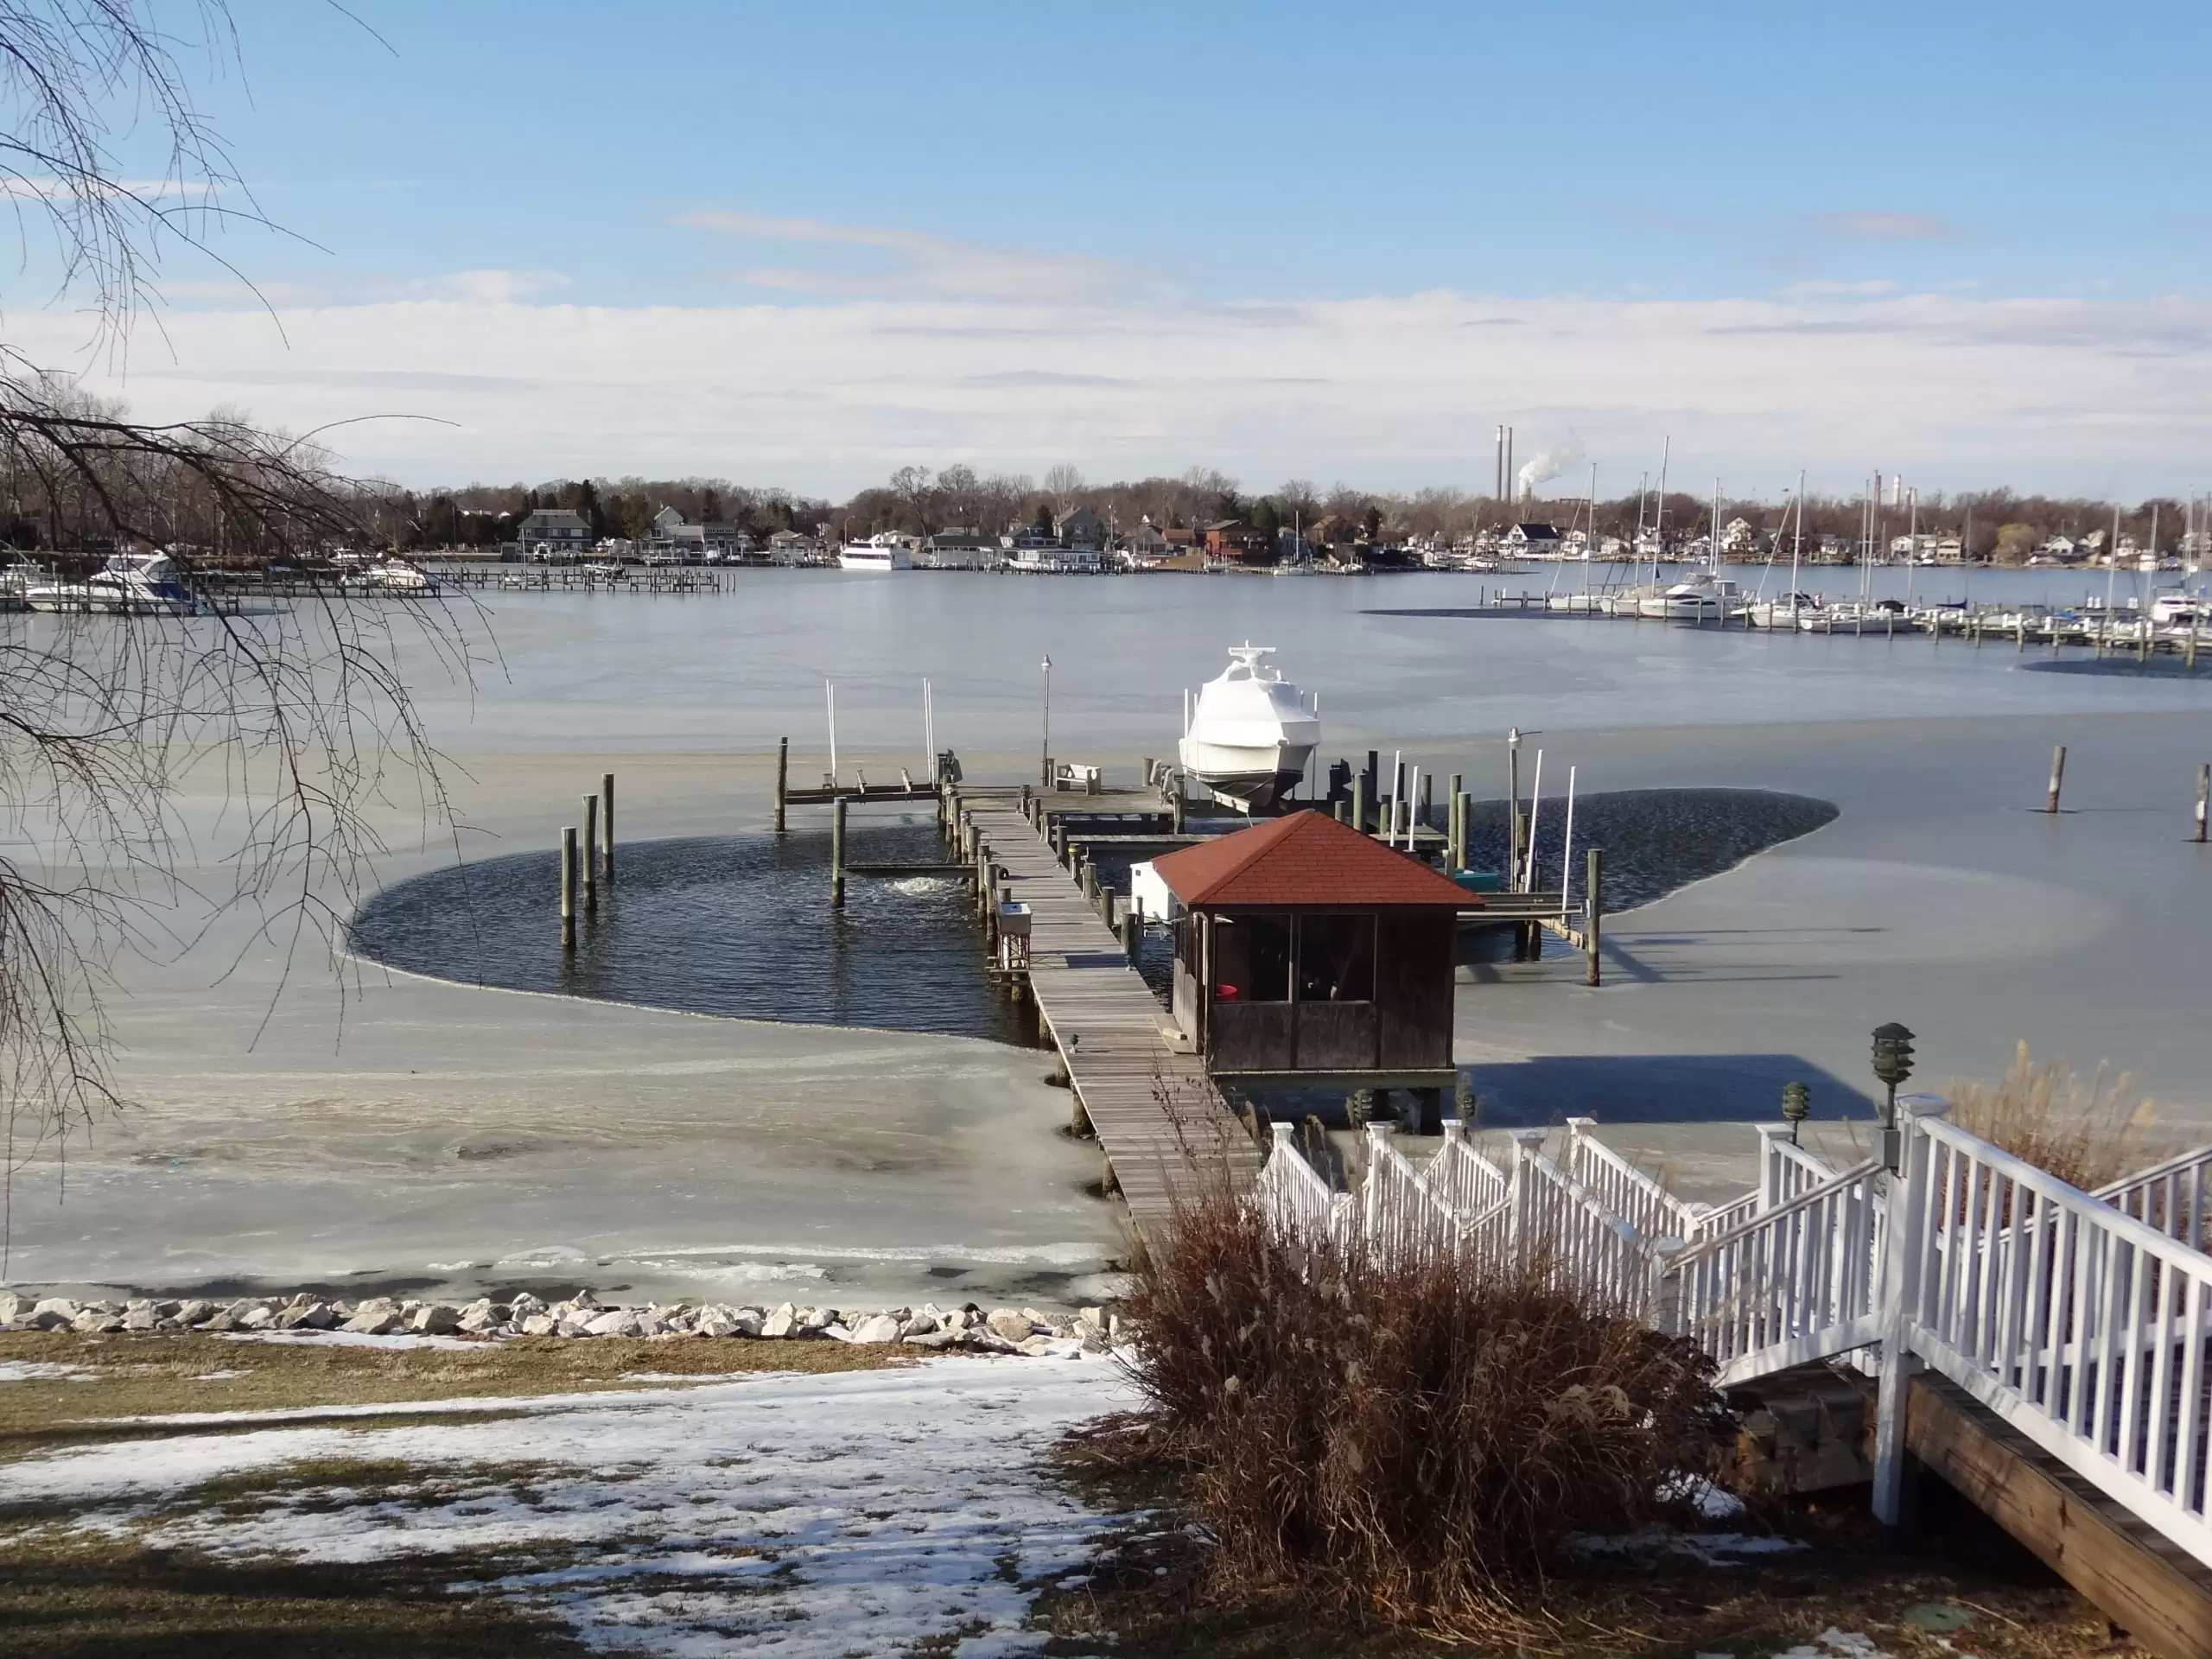 Wooden pier being protected from the lakes ice with an ice breaker